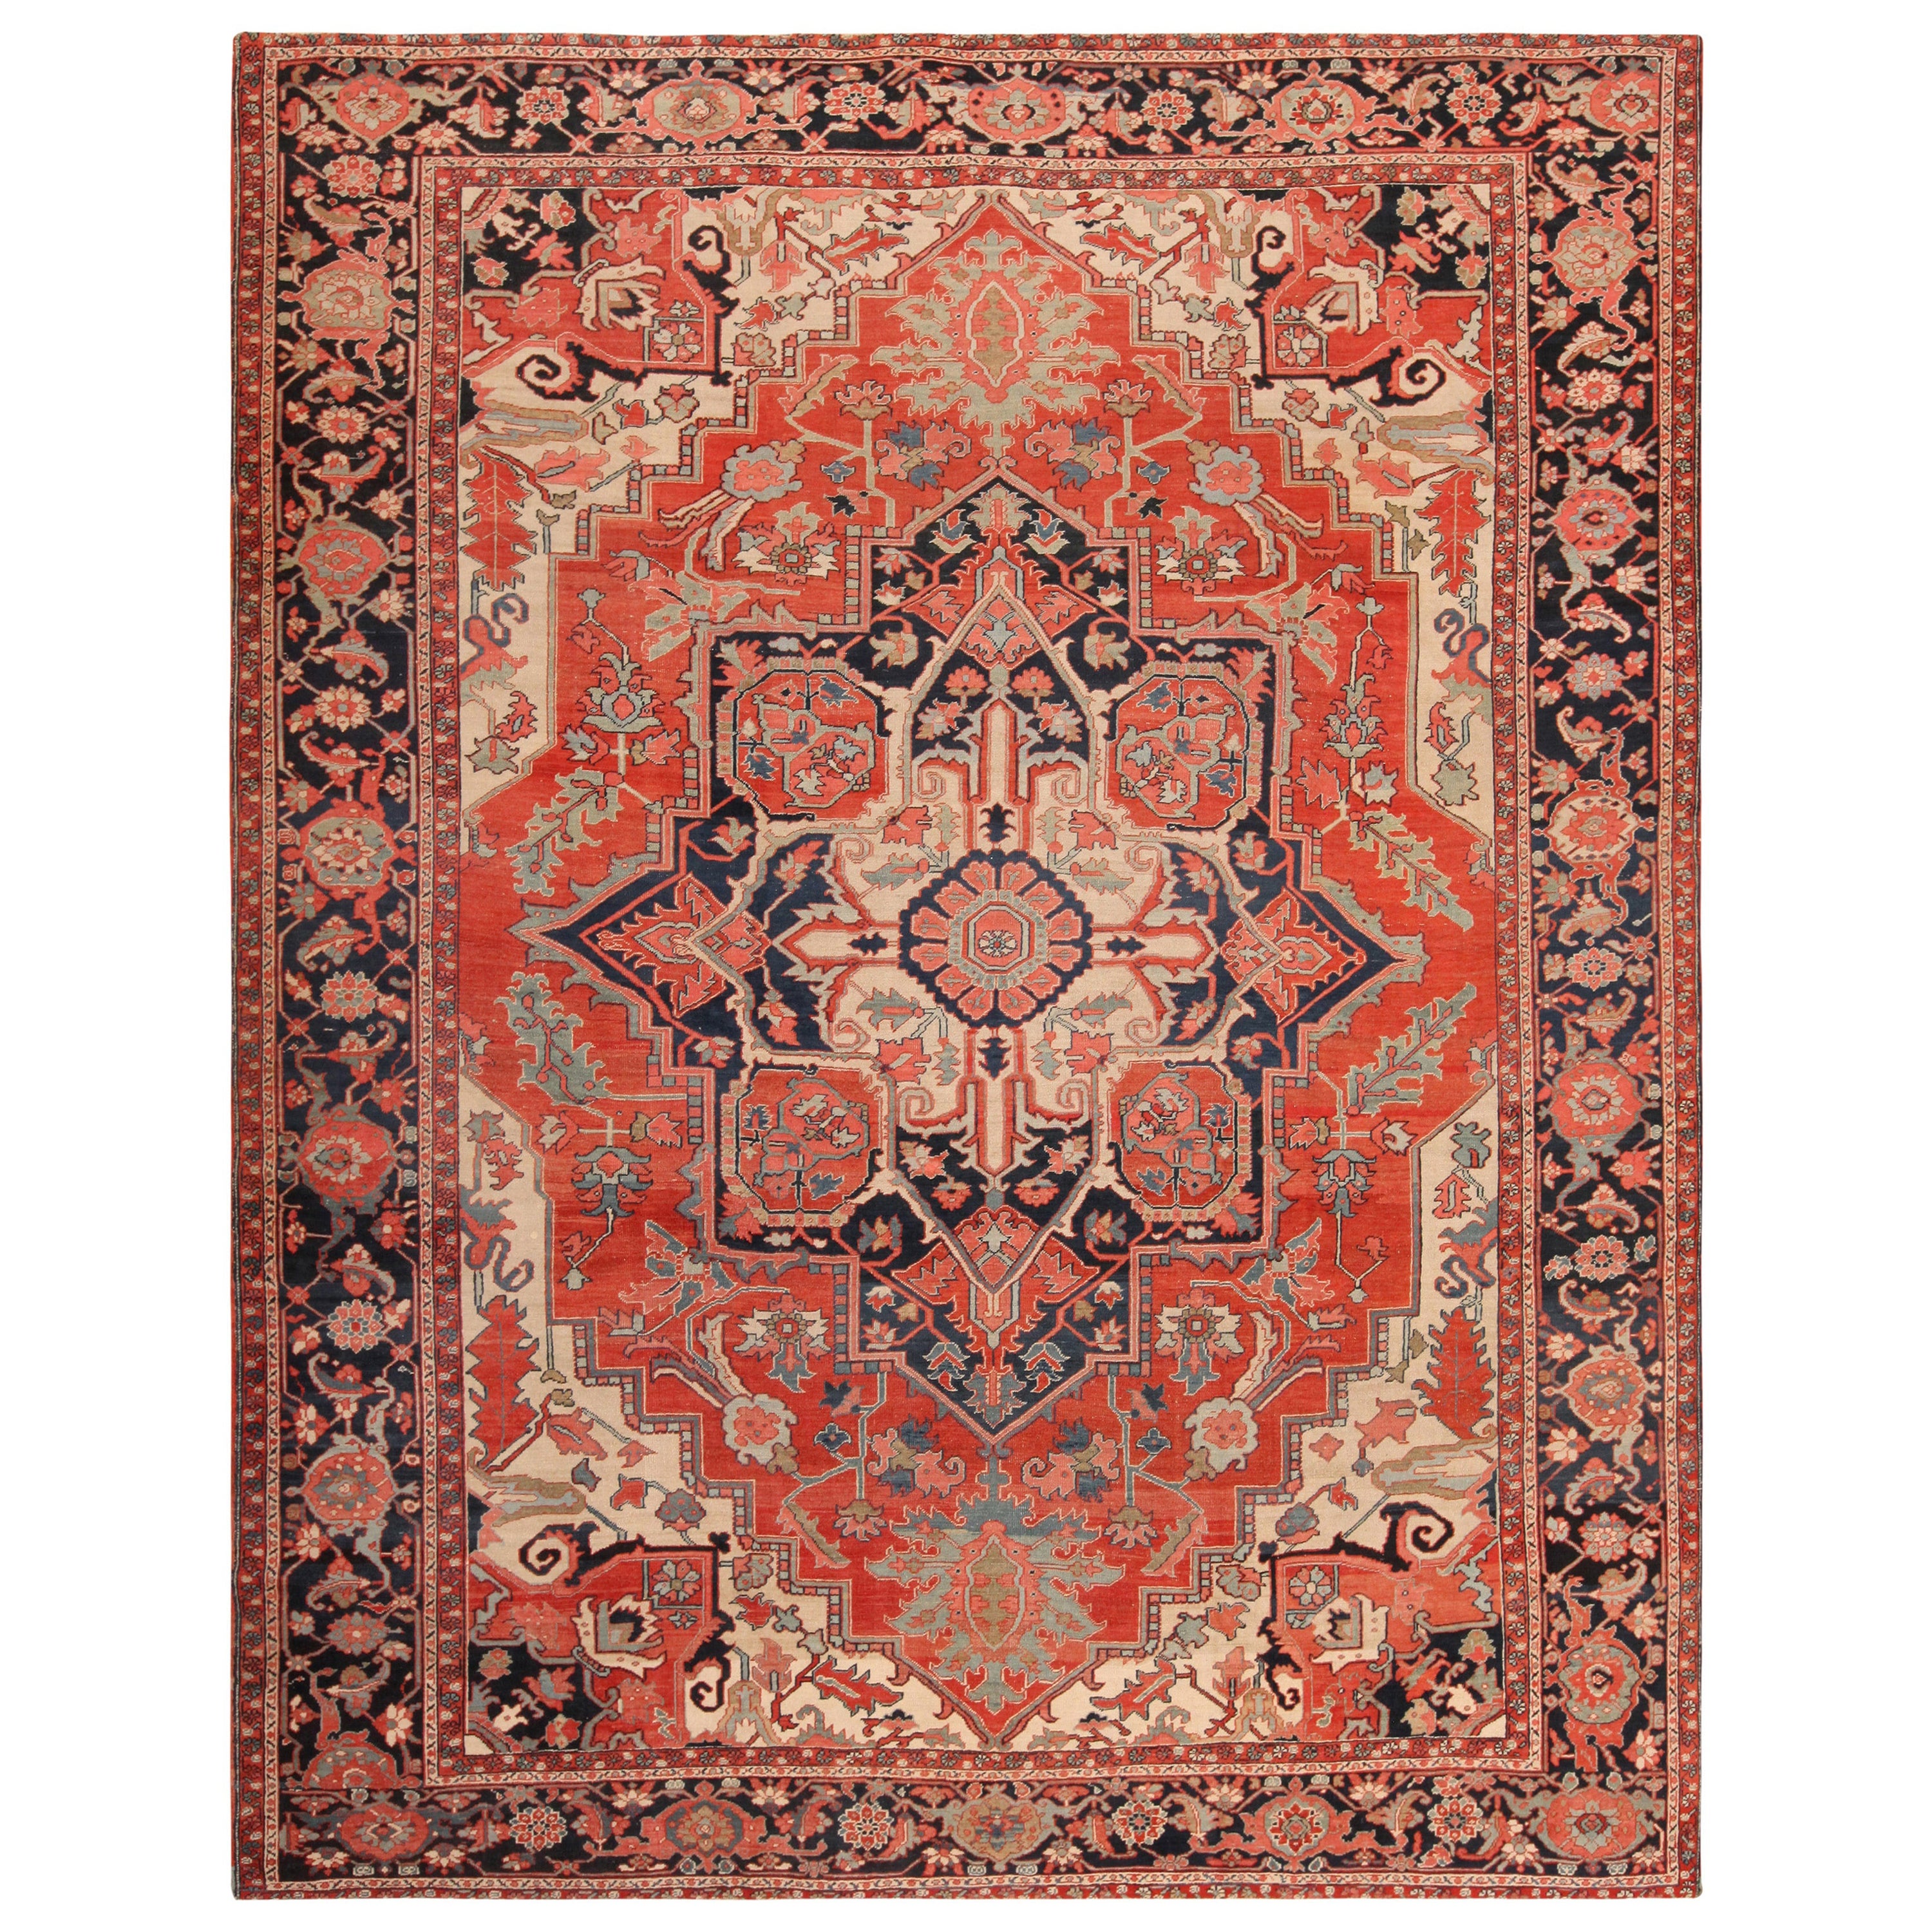 Antique Persian Serapi Rug. Size: 10 ft 4 in x 13 ft 2 in